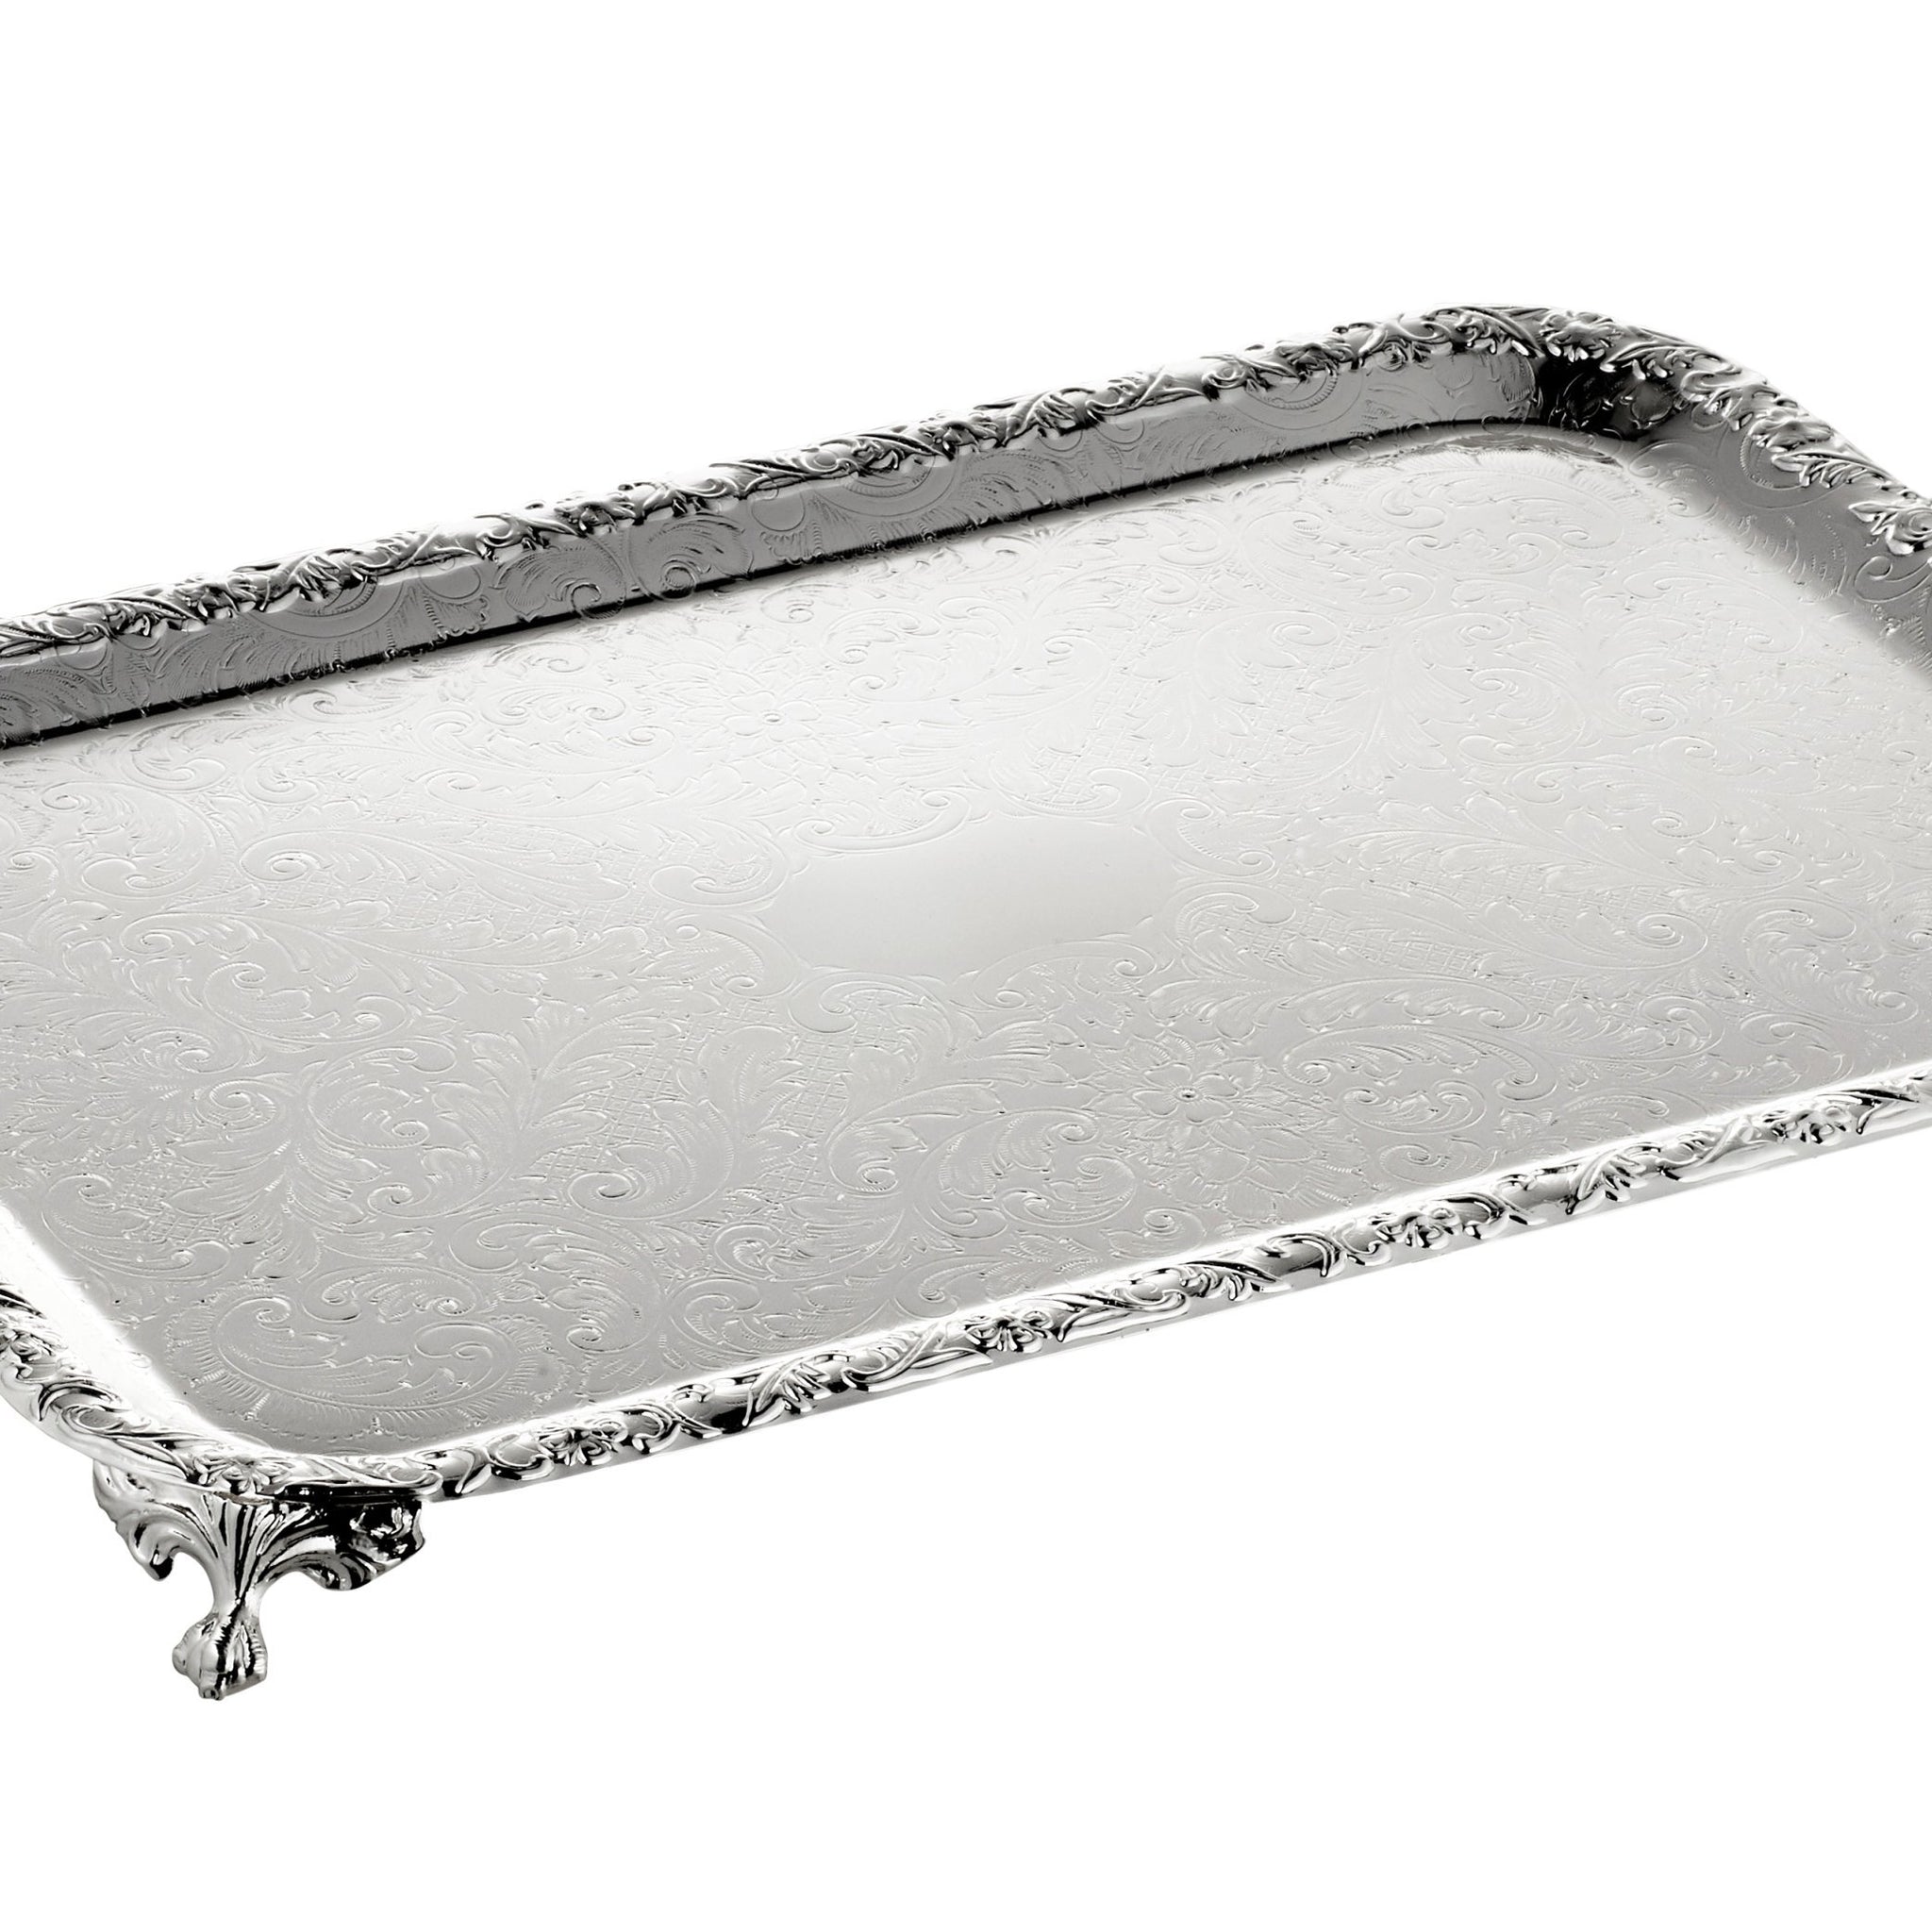 Queen Anne -Rectangular Tray with Handles & Legs - Silver Plated Metal - 63x34cm - 26000393